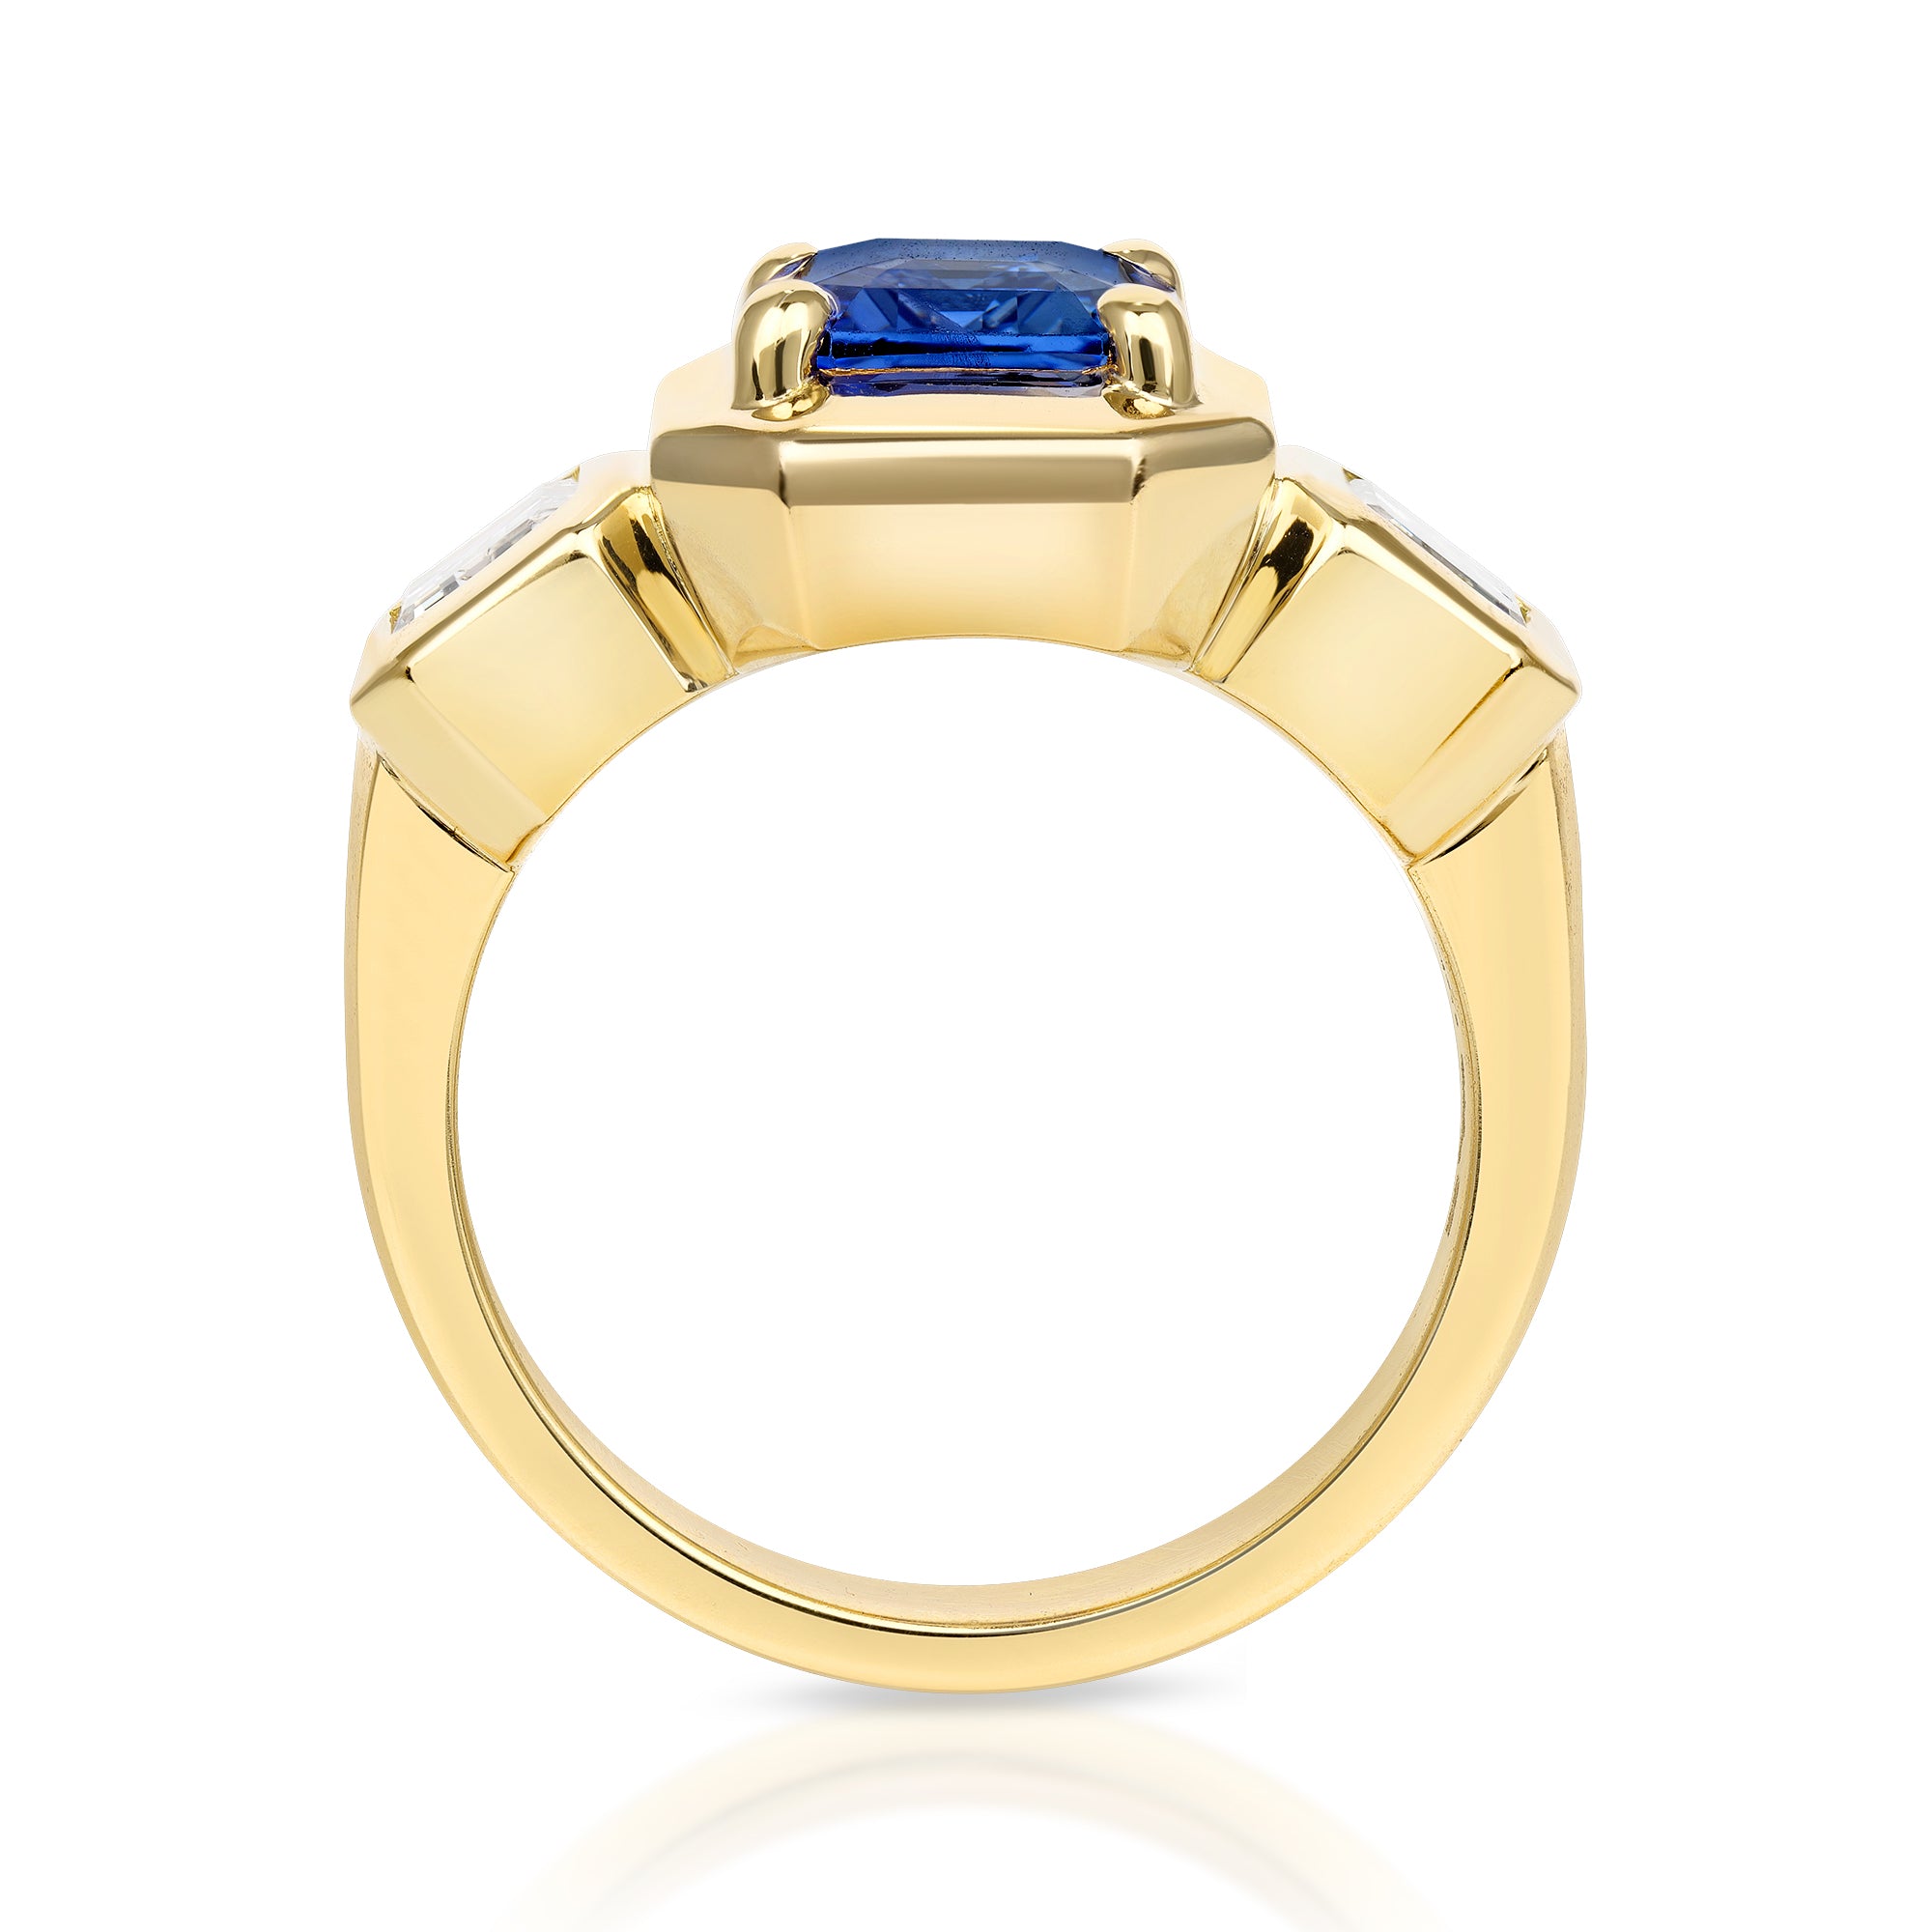 SINGLE STONE GLORIA RING featuring 2.90ct Sri Lankan GIA certified emerald cut blue sapphire with 1.00ctw GIA certified emerald cut diamonds prong set in a handcrafted 18K yellow gold mounting.